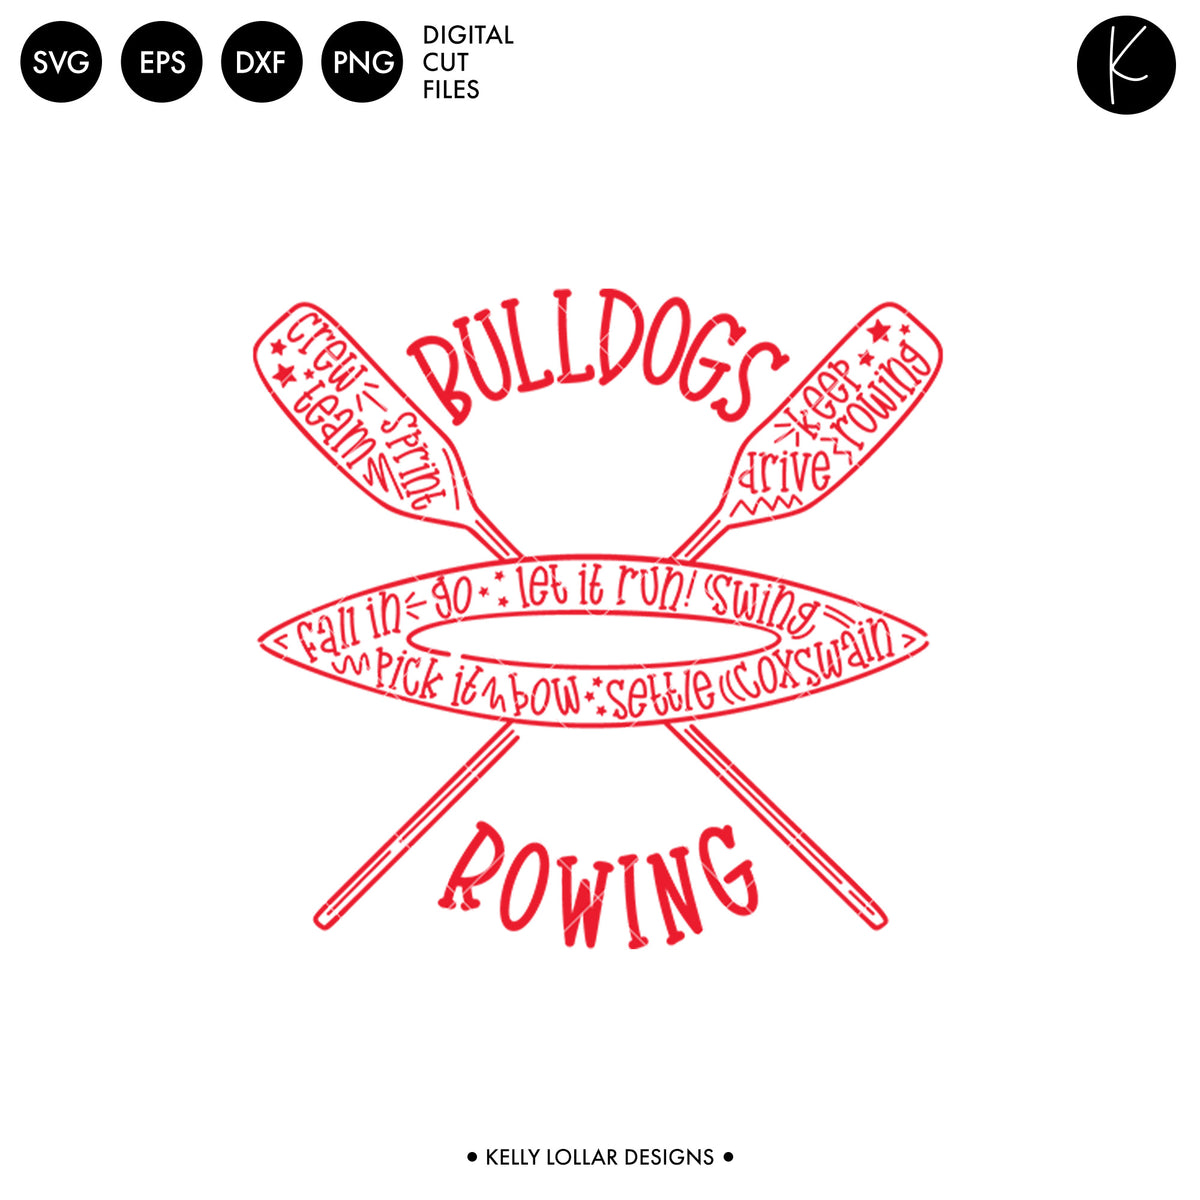 Bulldogs Rowing Crew Bundle | SVG DXF EPS PNG Cut Files